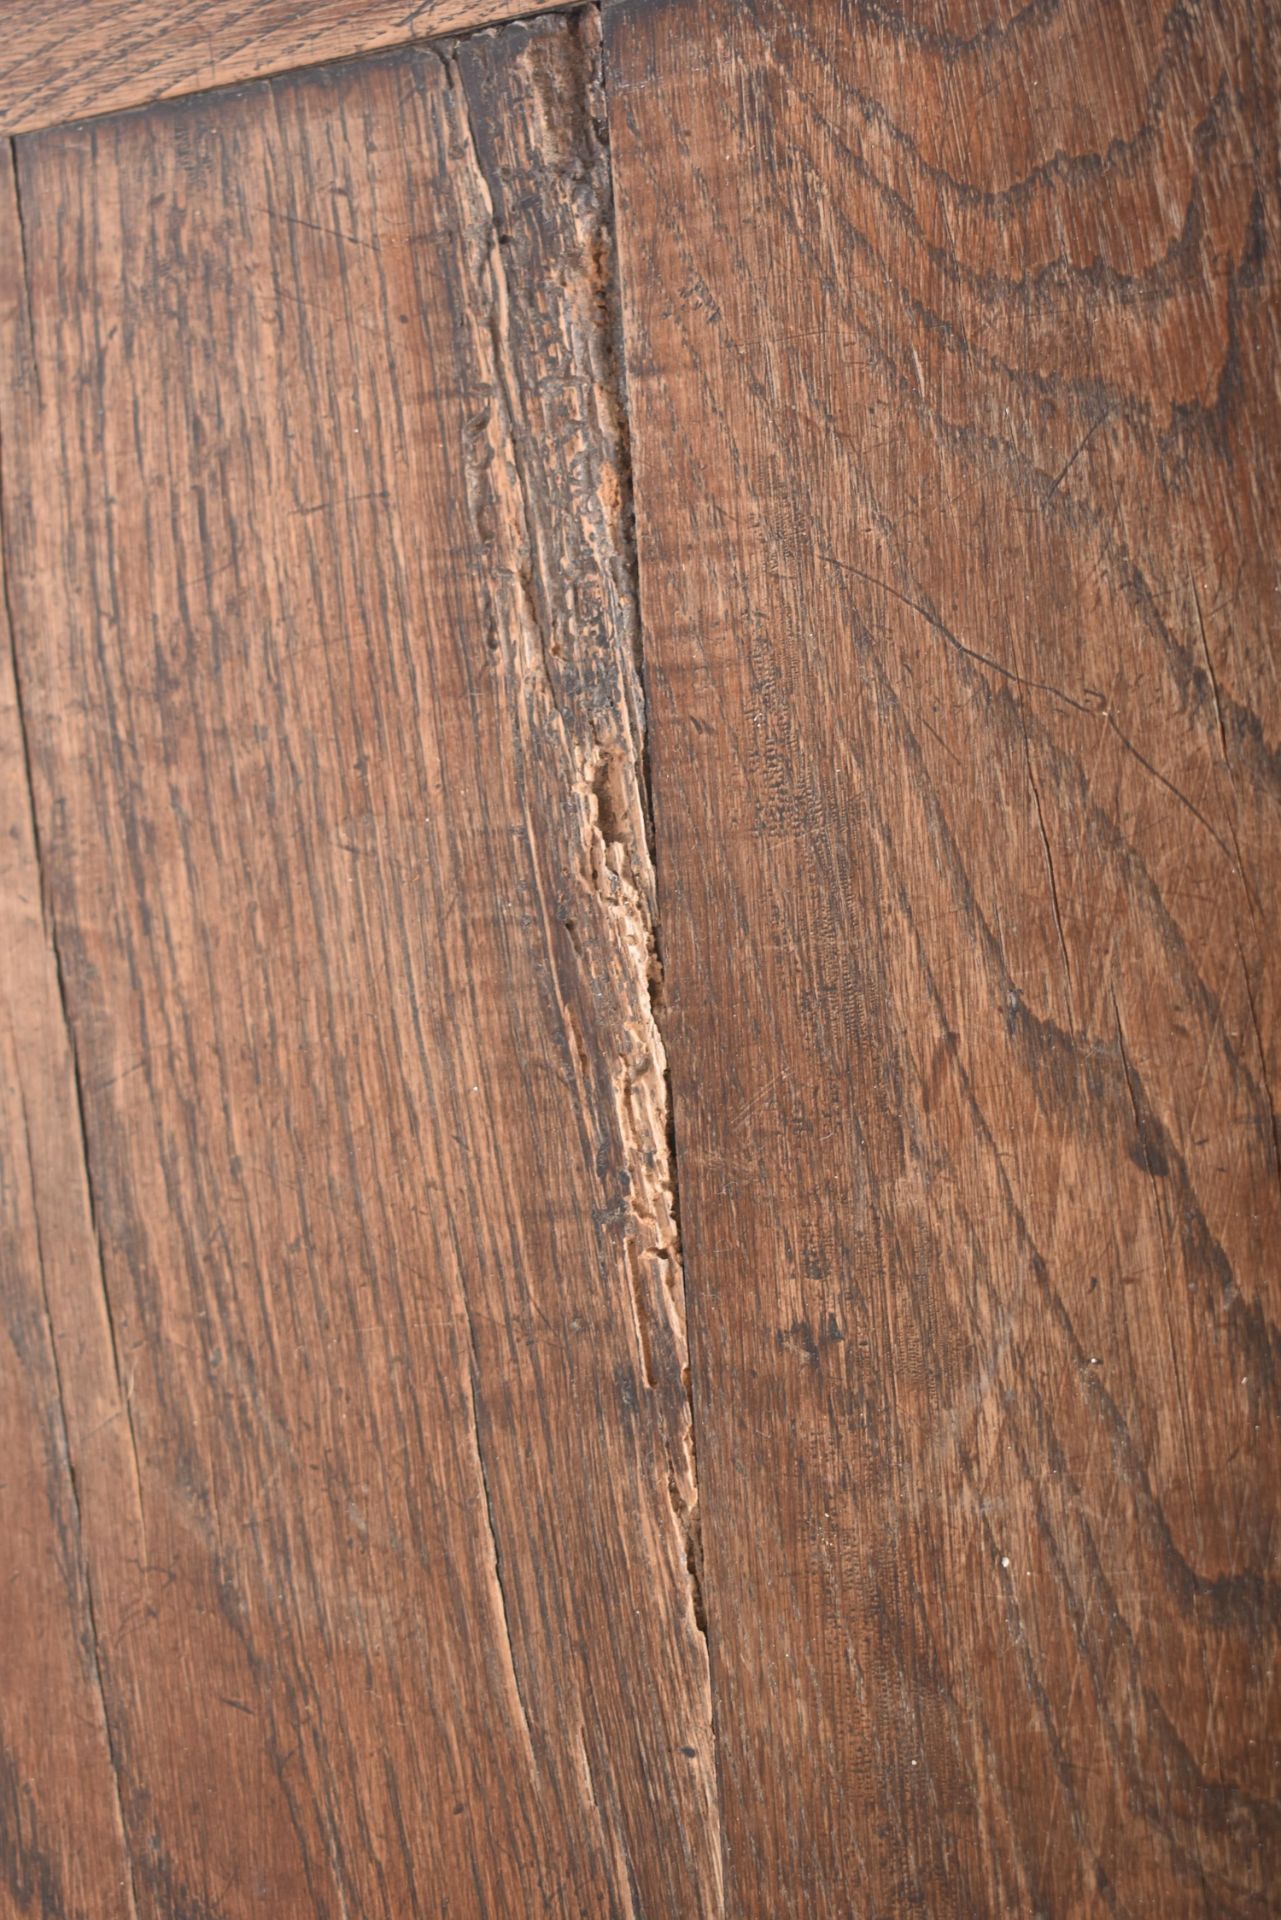 17TH CENTURY ENGLISH OAK REFECTORY DINING TABLE - Image 6 of 8